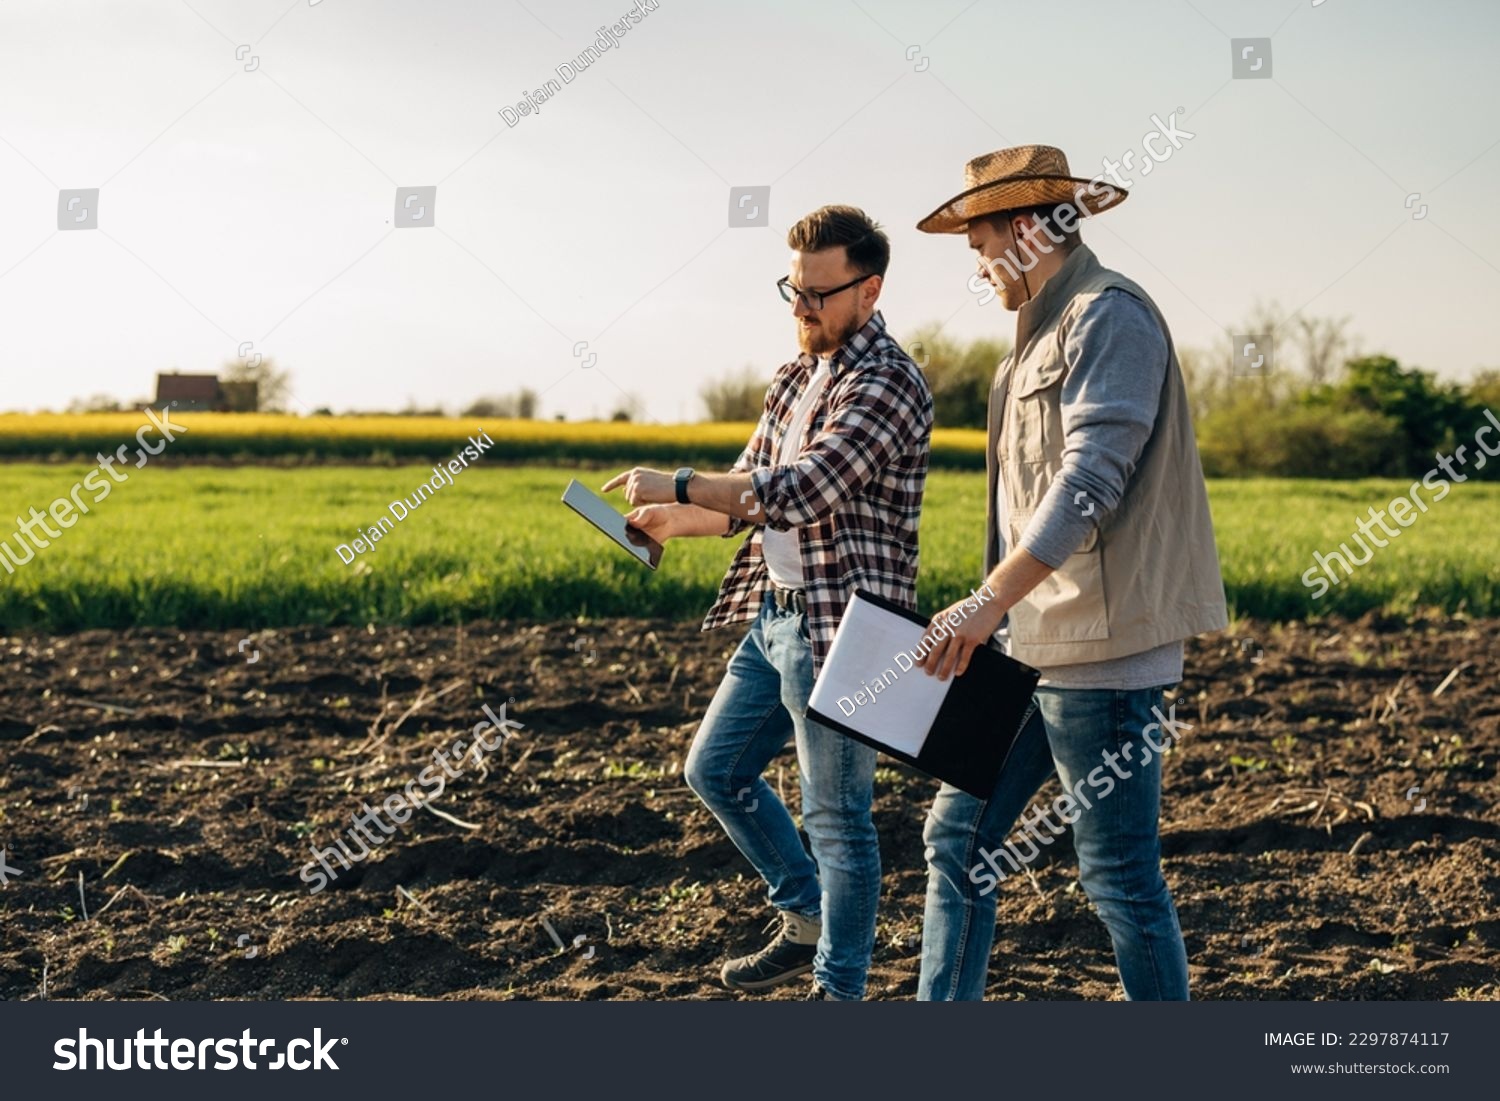 Inspector and a farmer walk across the farmland. The inspector points to a tablet he is holding. #2297874117